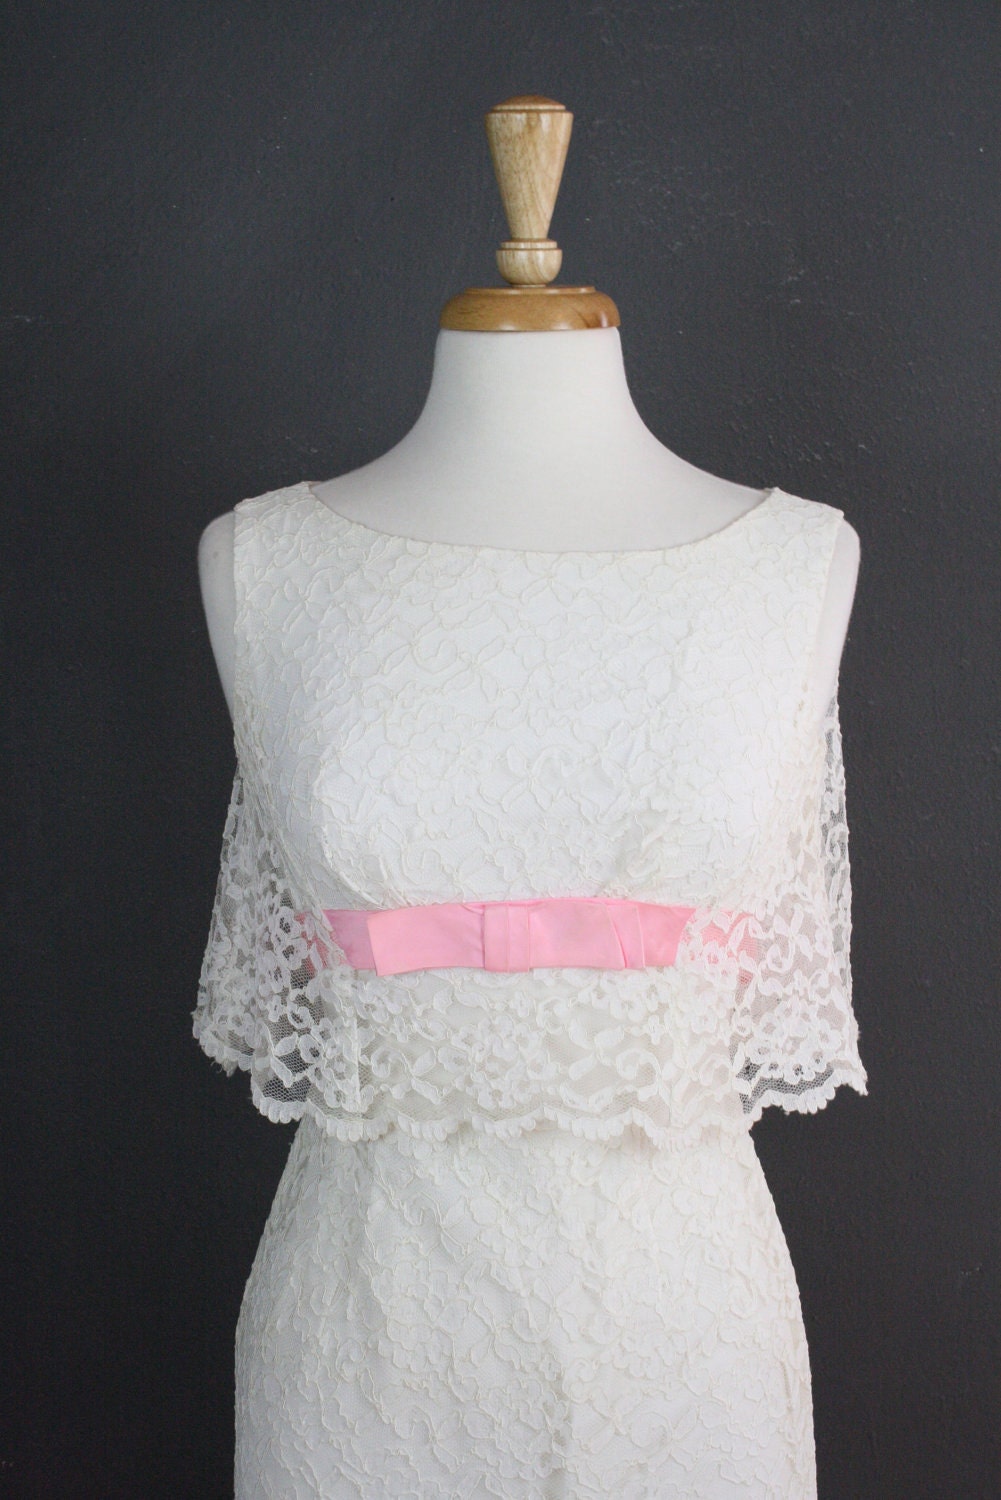 1950s wedding dress white lace floor length dress with pink bow long